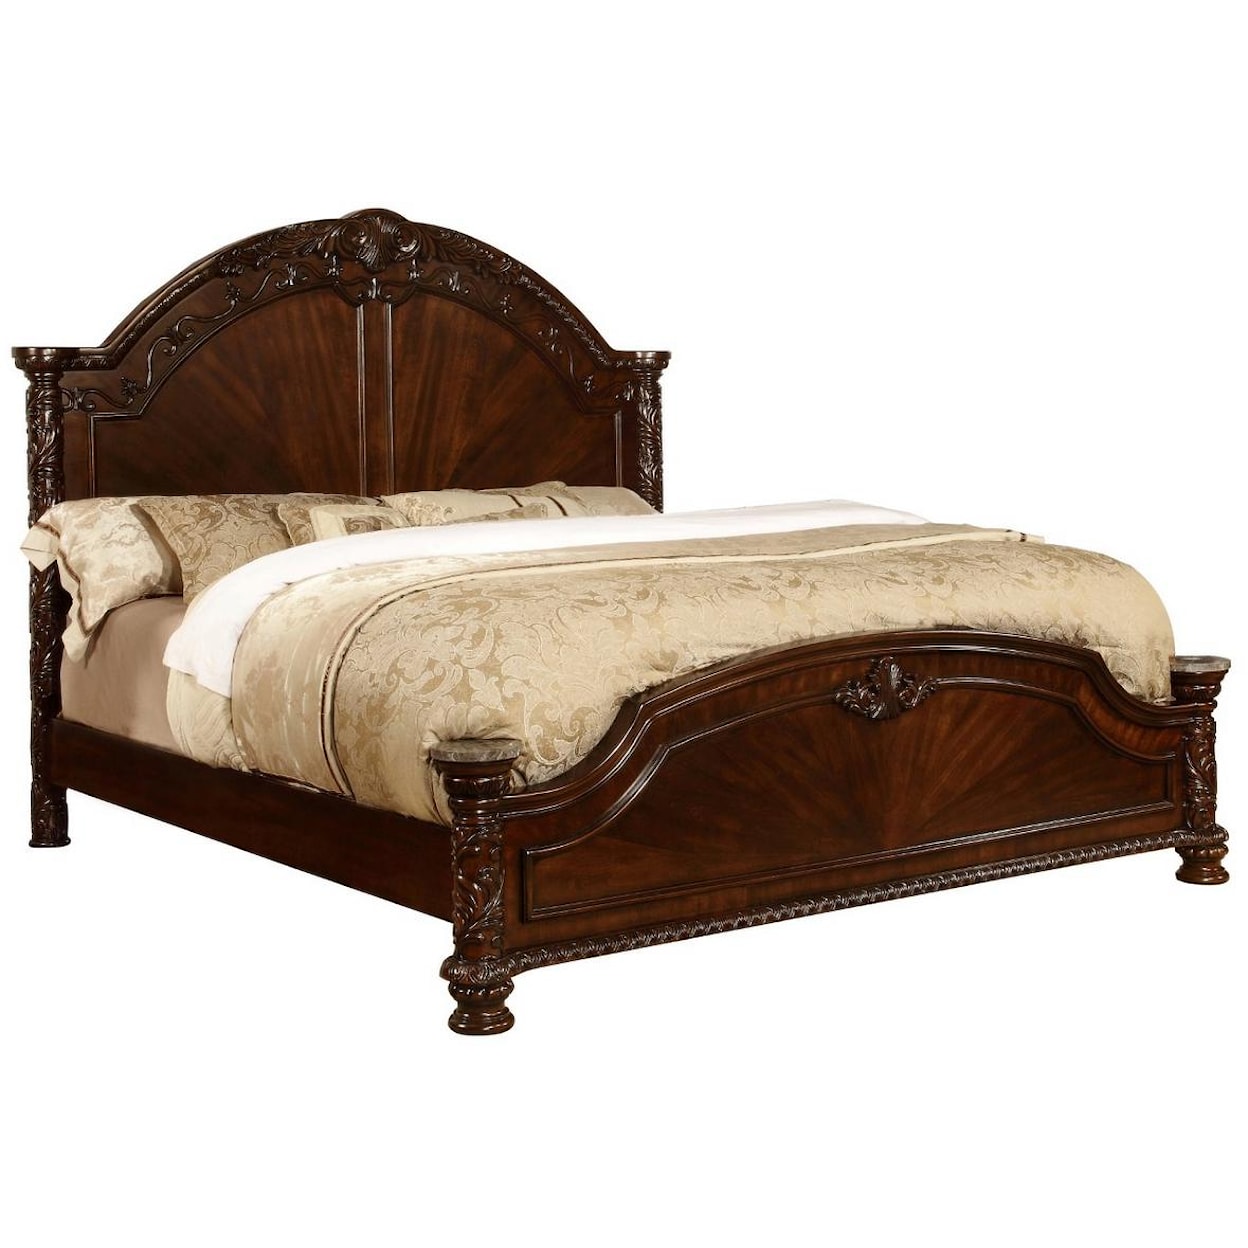 Fairfax Home Furnishings Patterson King Poster Bed